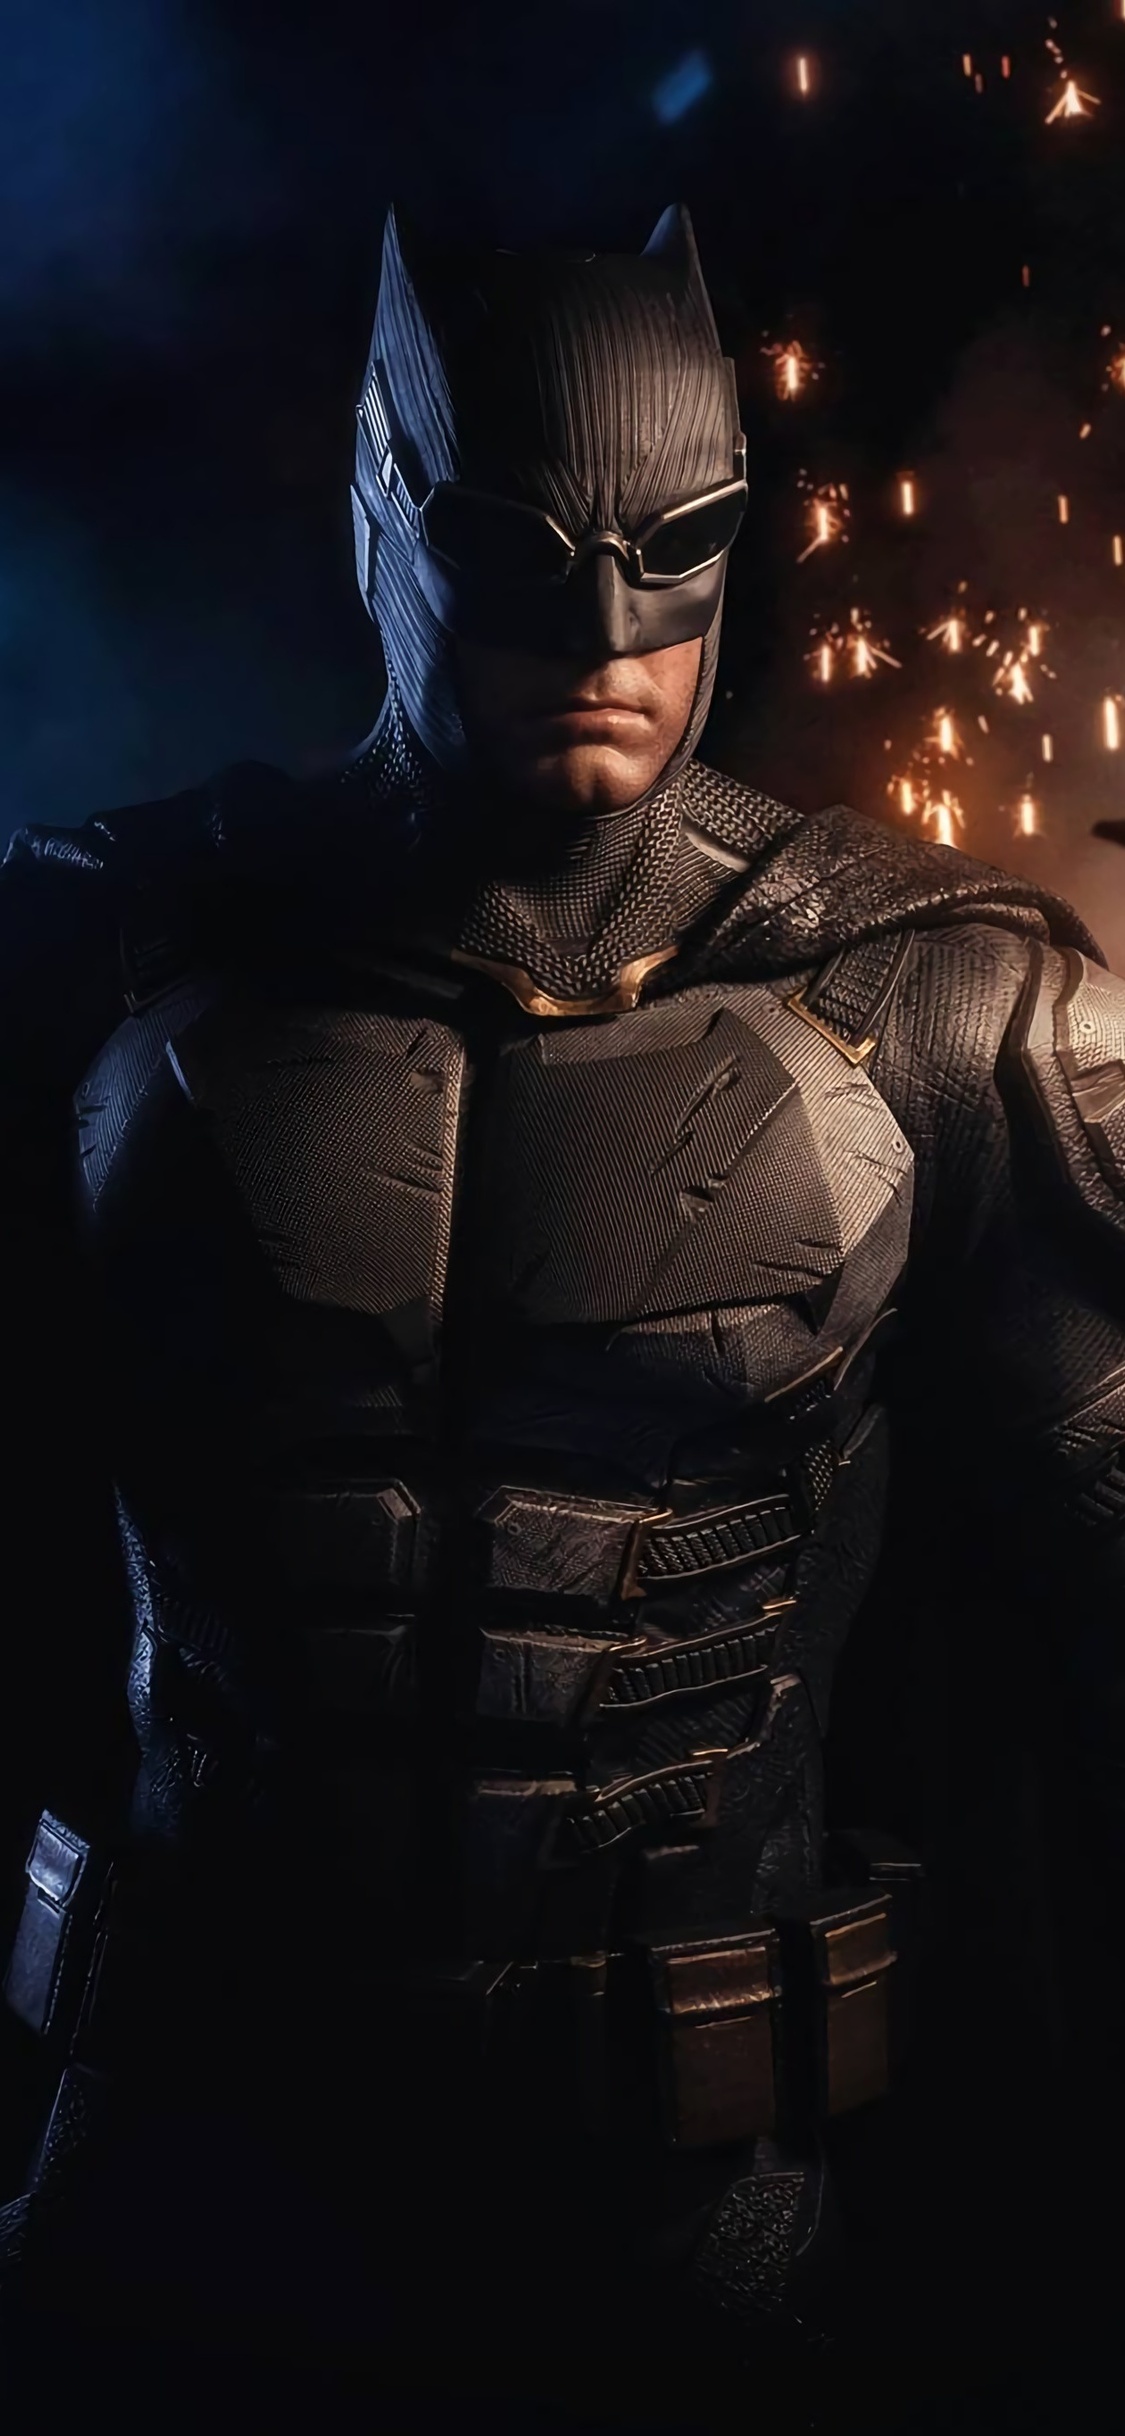 Batman New 4k iPhone XS, iPhone iPhone X HD 4k Wallpaper, Image, Background, Photo and Picture